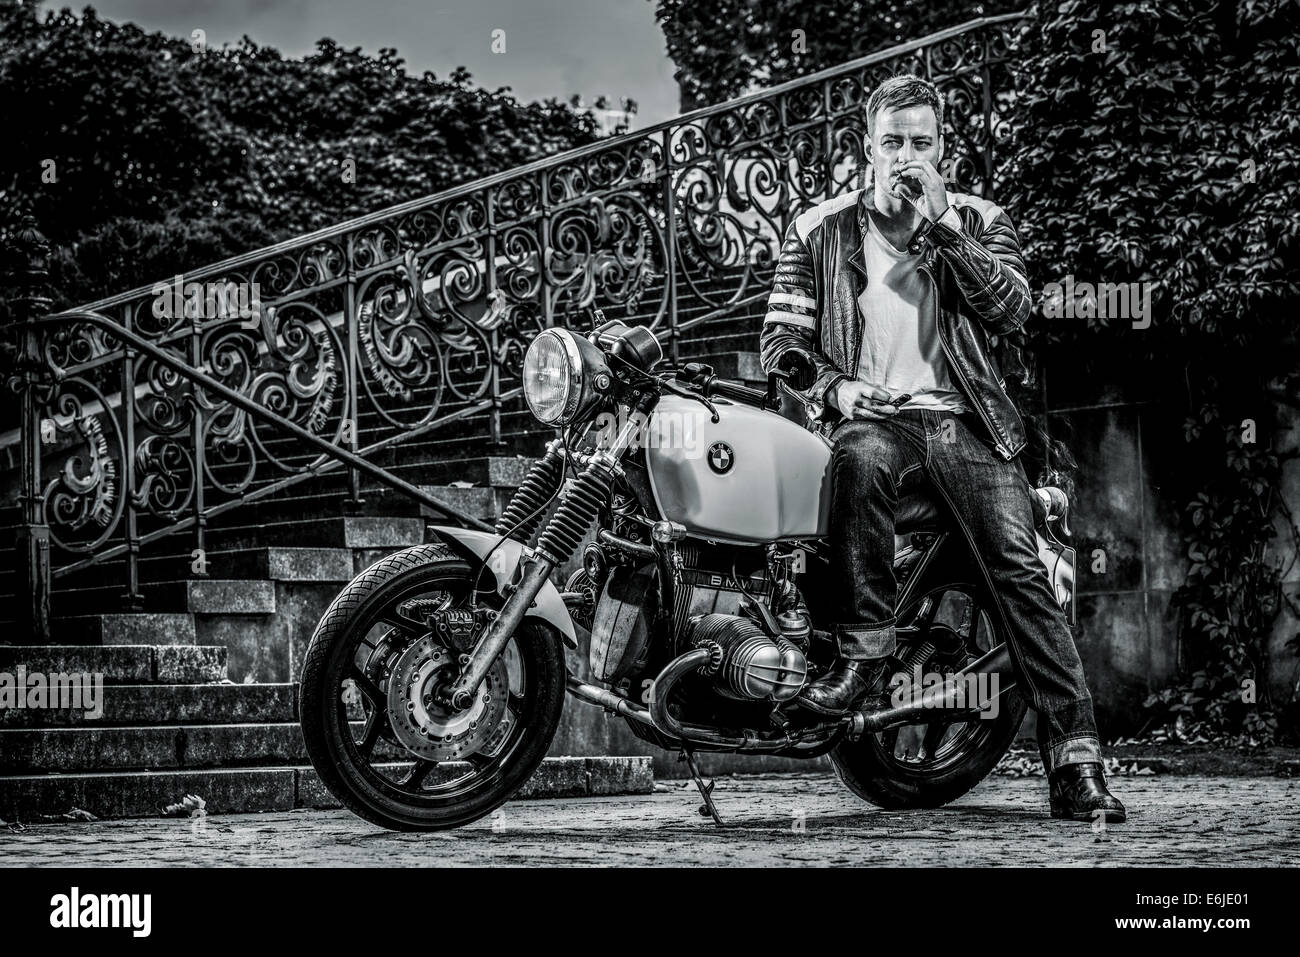 EXCLUSIVE: The actor Tom Wlaschiha during a exclusive photo shoot with a BMW RT80 (Cafe Racer) bike on August 09, 2014 in Berlin, Germany. Photo: picture alliance / Robert Schlesinger Stock Photo